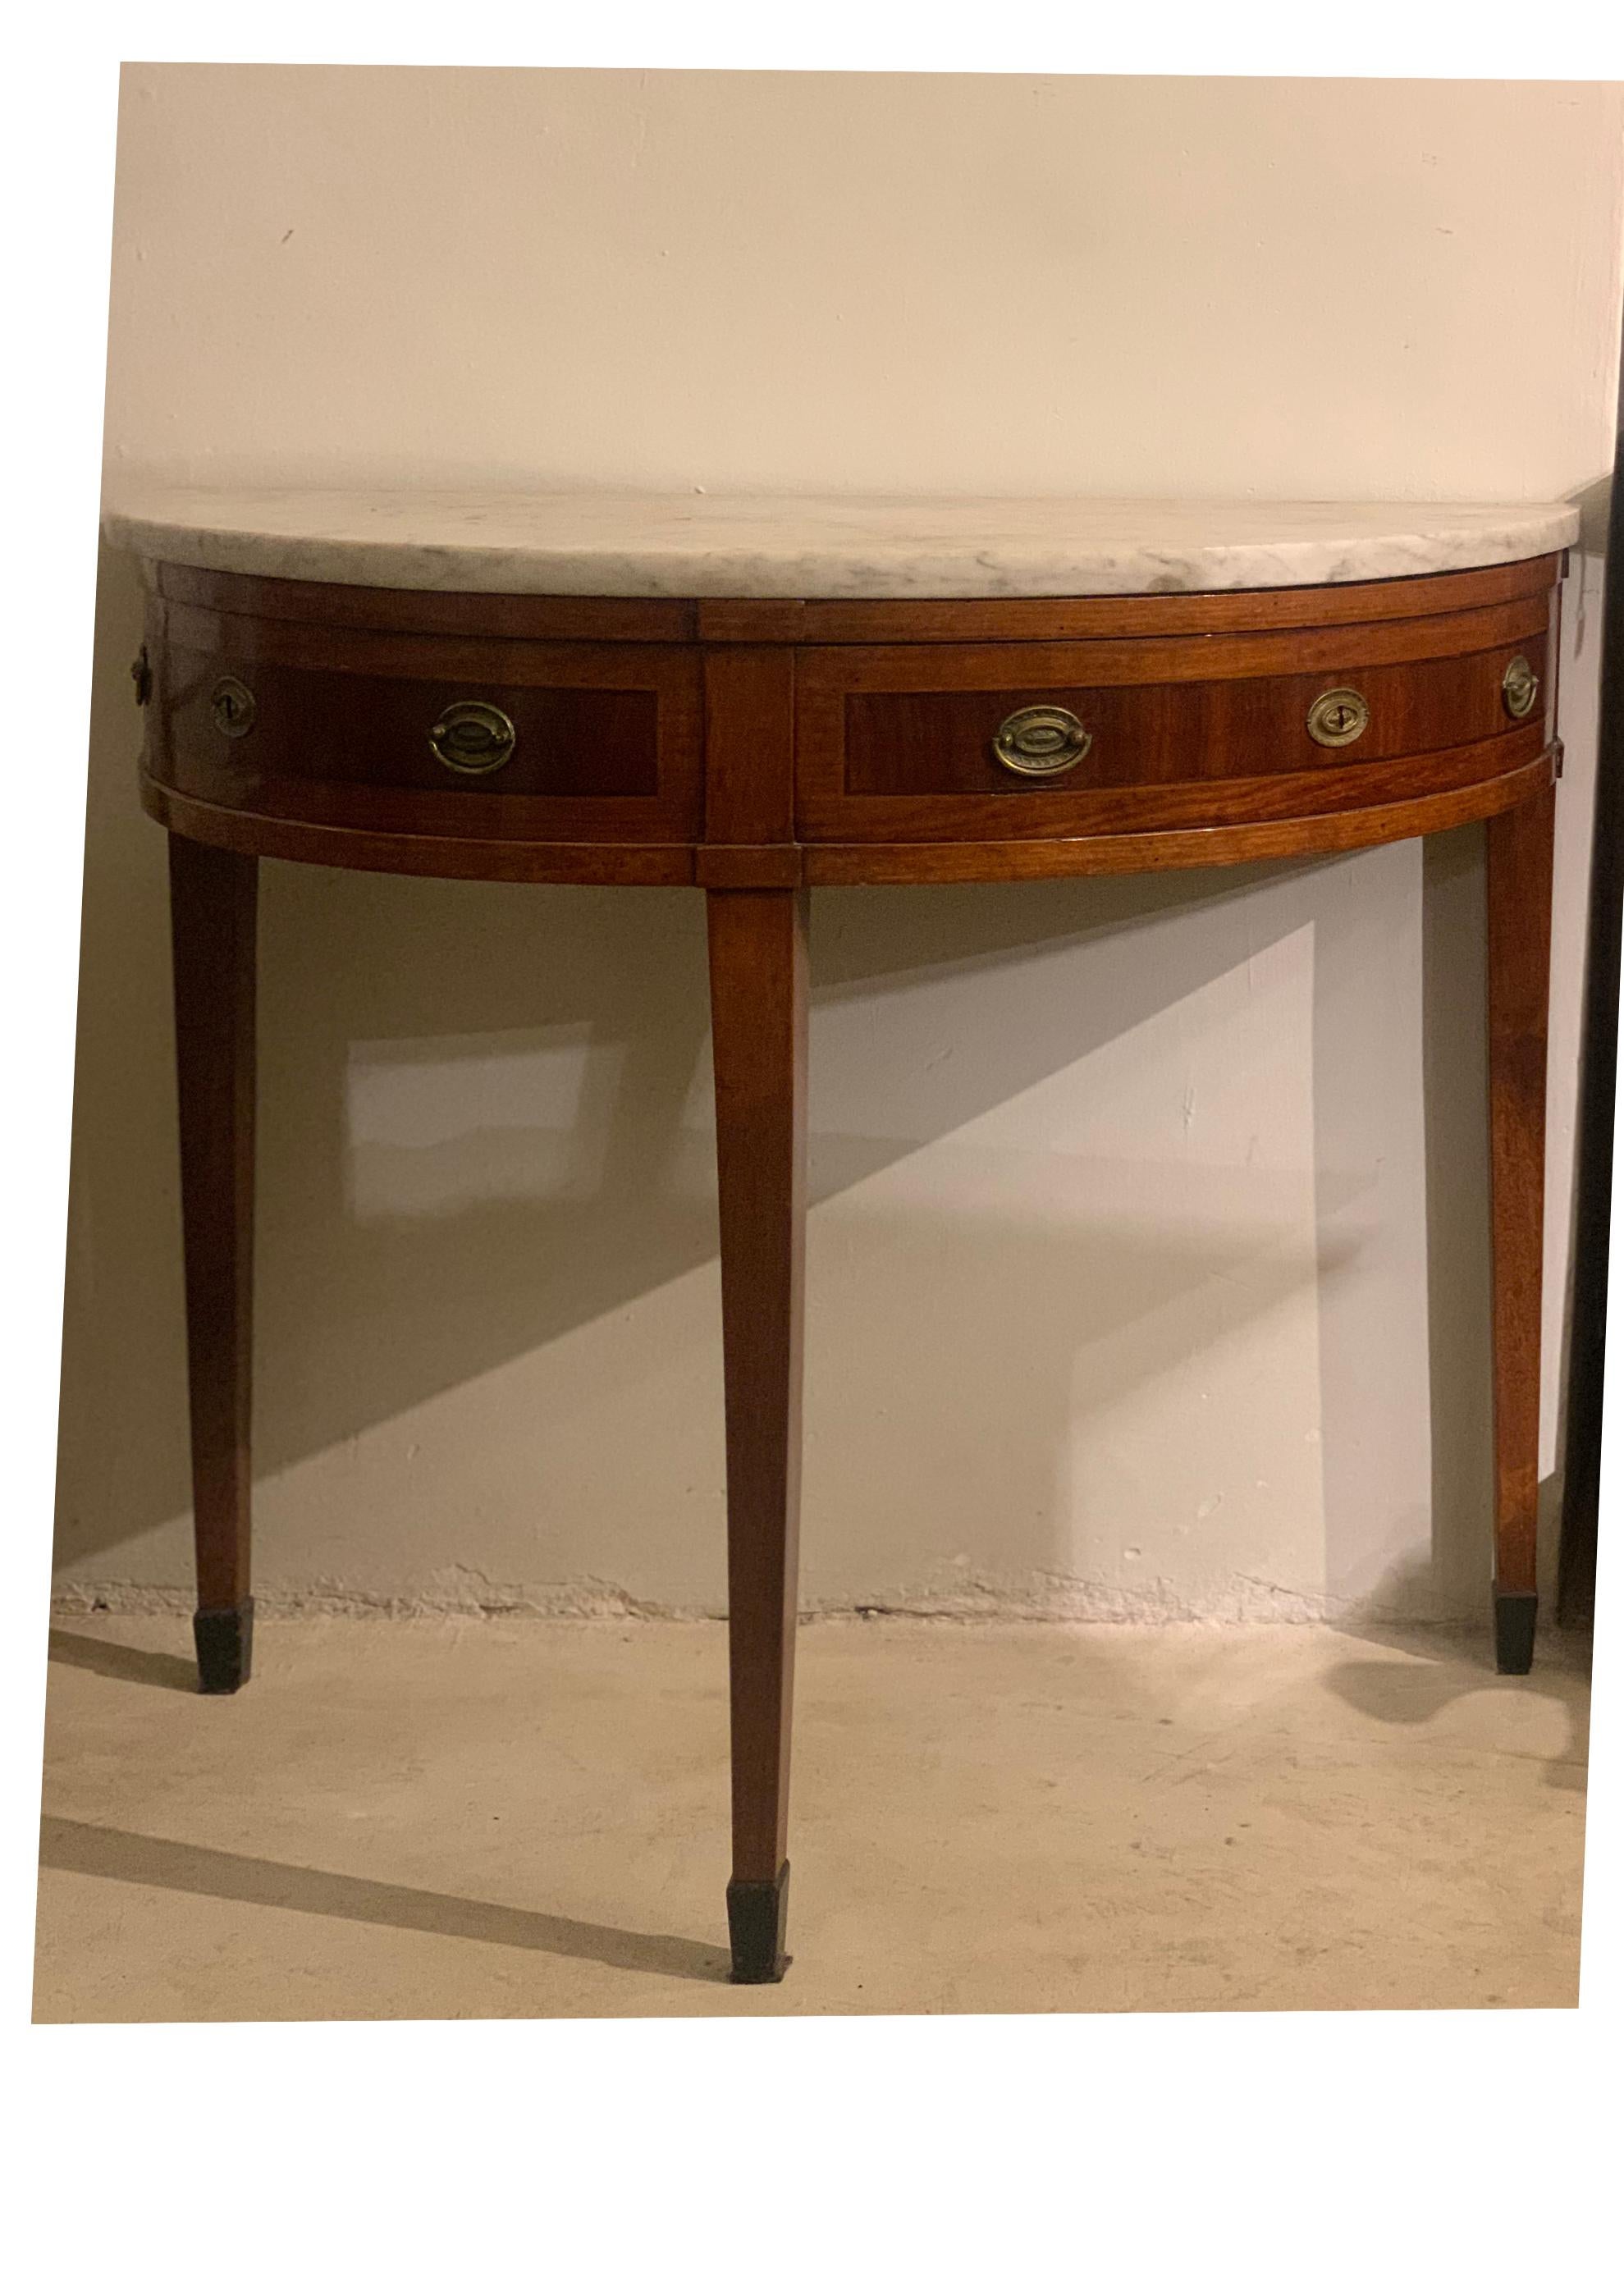 BEAUTIFUL TUSCAN WALL CONSOLE WITH CARRARA MARBLE TOP AND WALNUT WOOD UNDERSIDE WITH CHERRY WOOD FINISHES. Very particular is the opening of the two drawers that rotate around a pin so that they can be fully exploited without having the risk of them